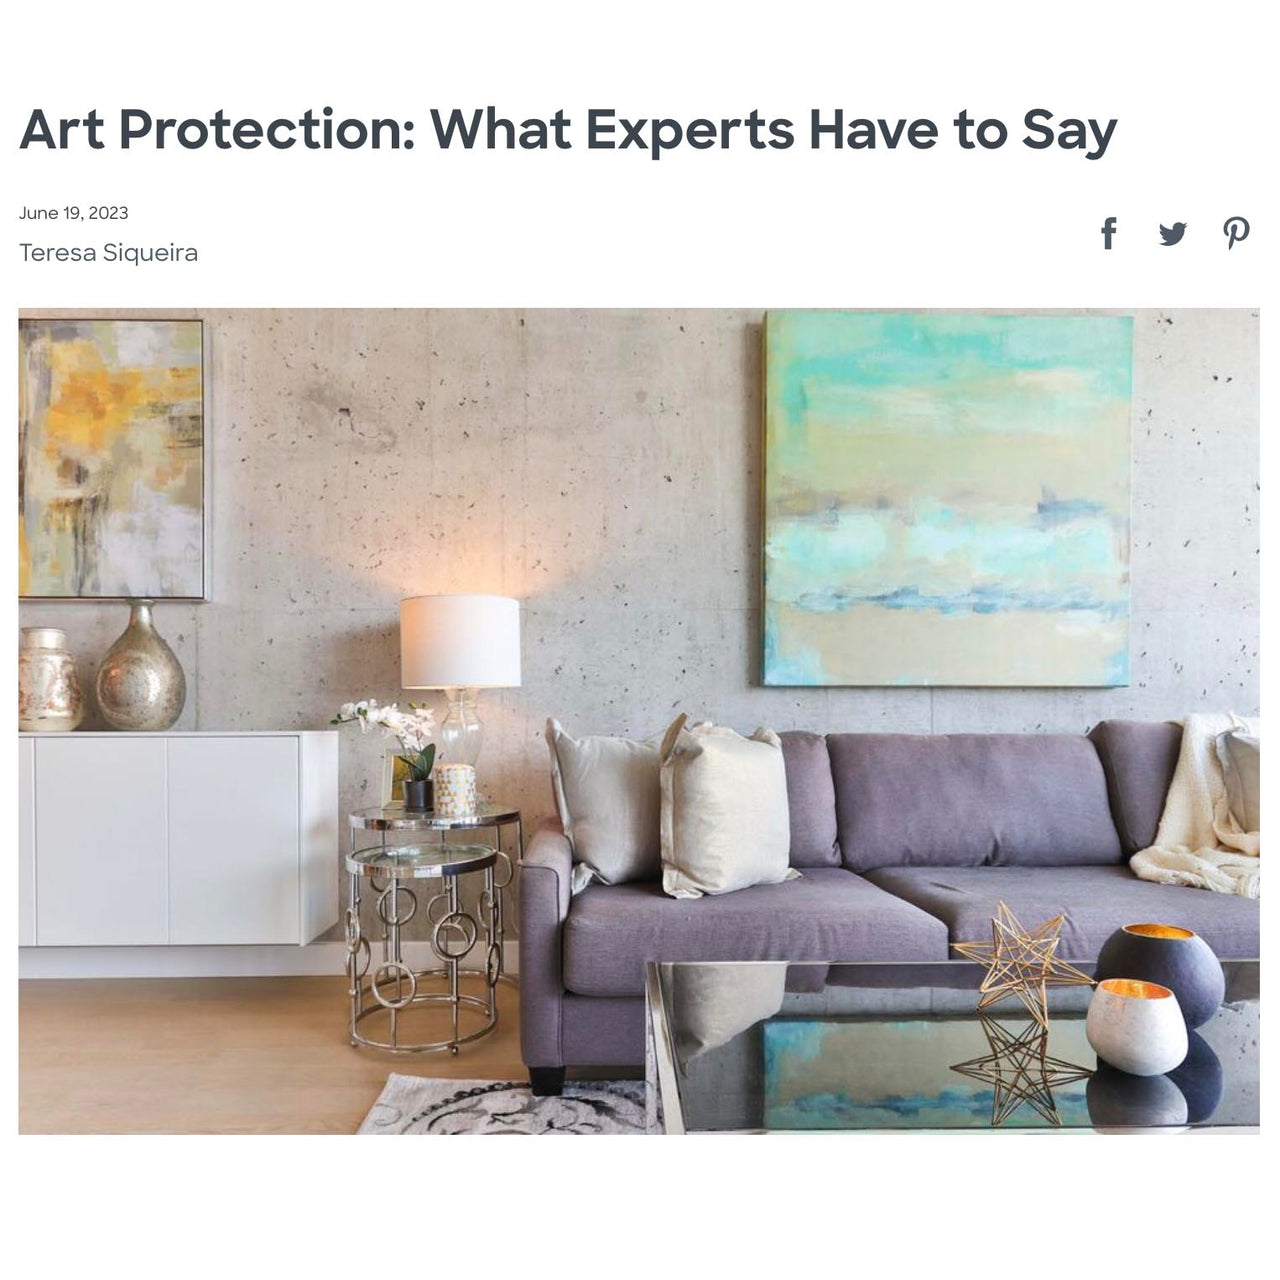 PxP featured as an expert contributor on protecting your art collection